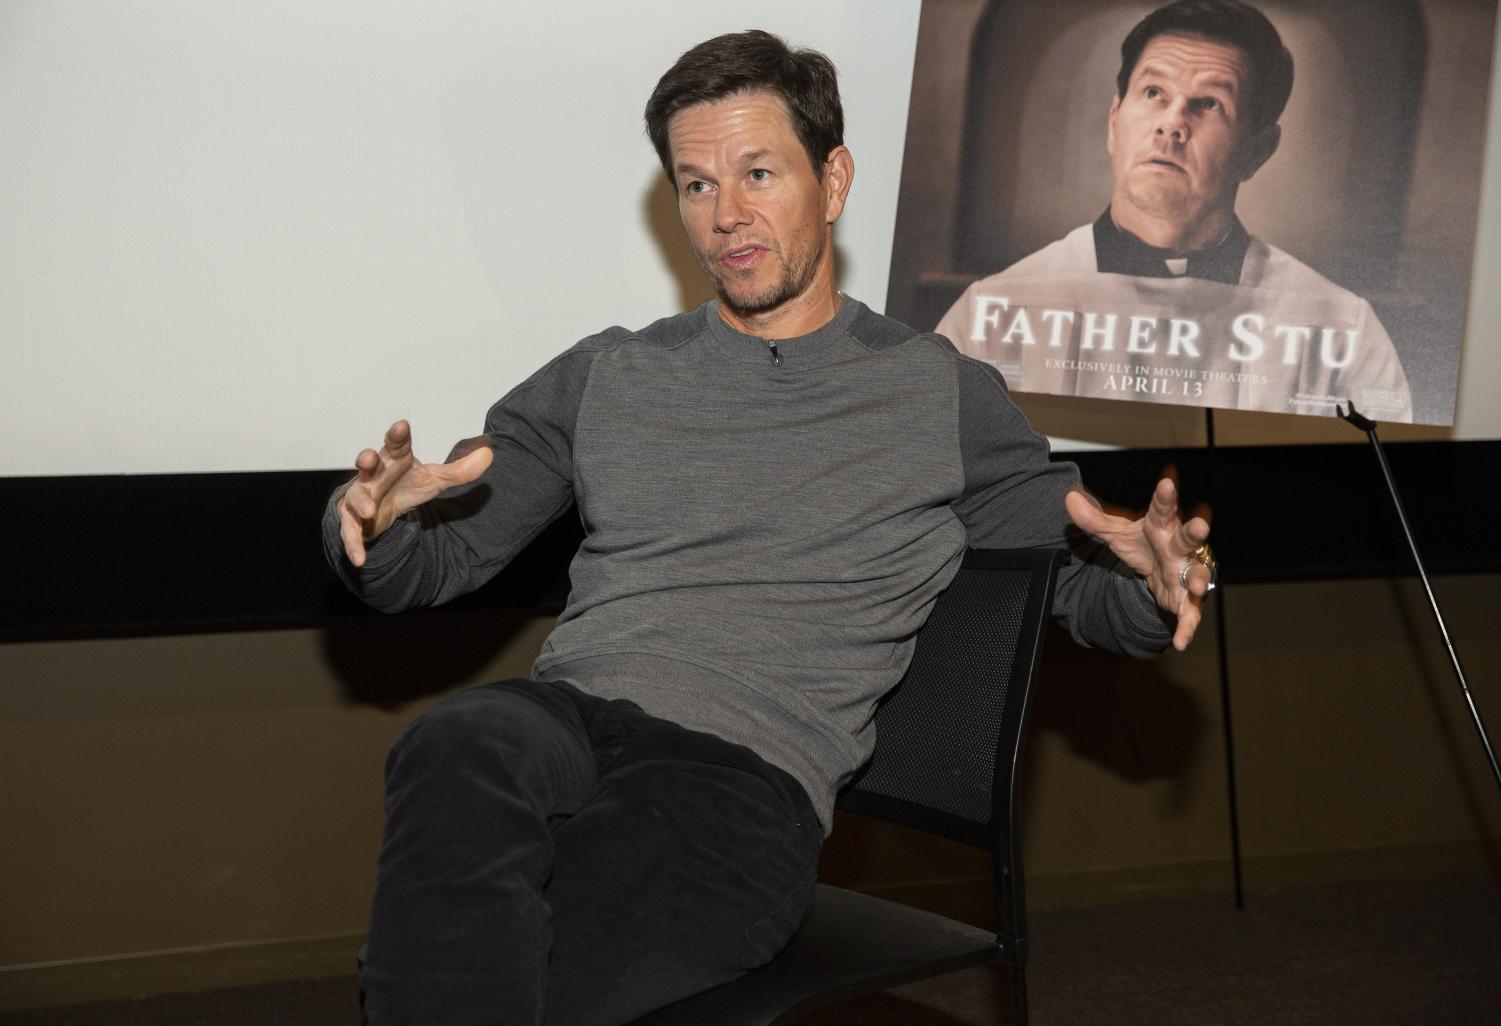 Mark+Wahlberg+sits+in+front+of+a+poster+for+his+new+film%2C+%E2%80%9CFather+Stu.%E2%80%9D